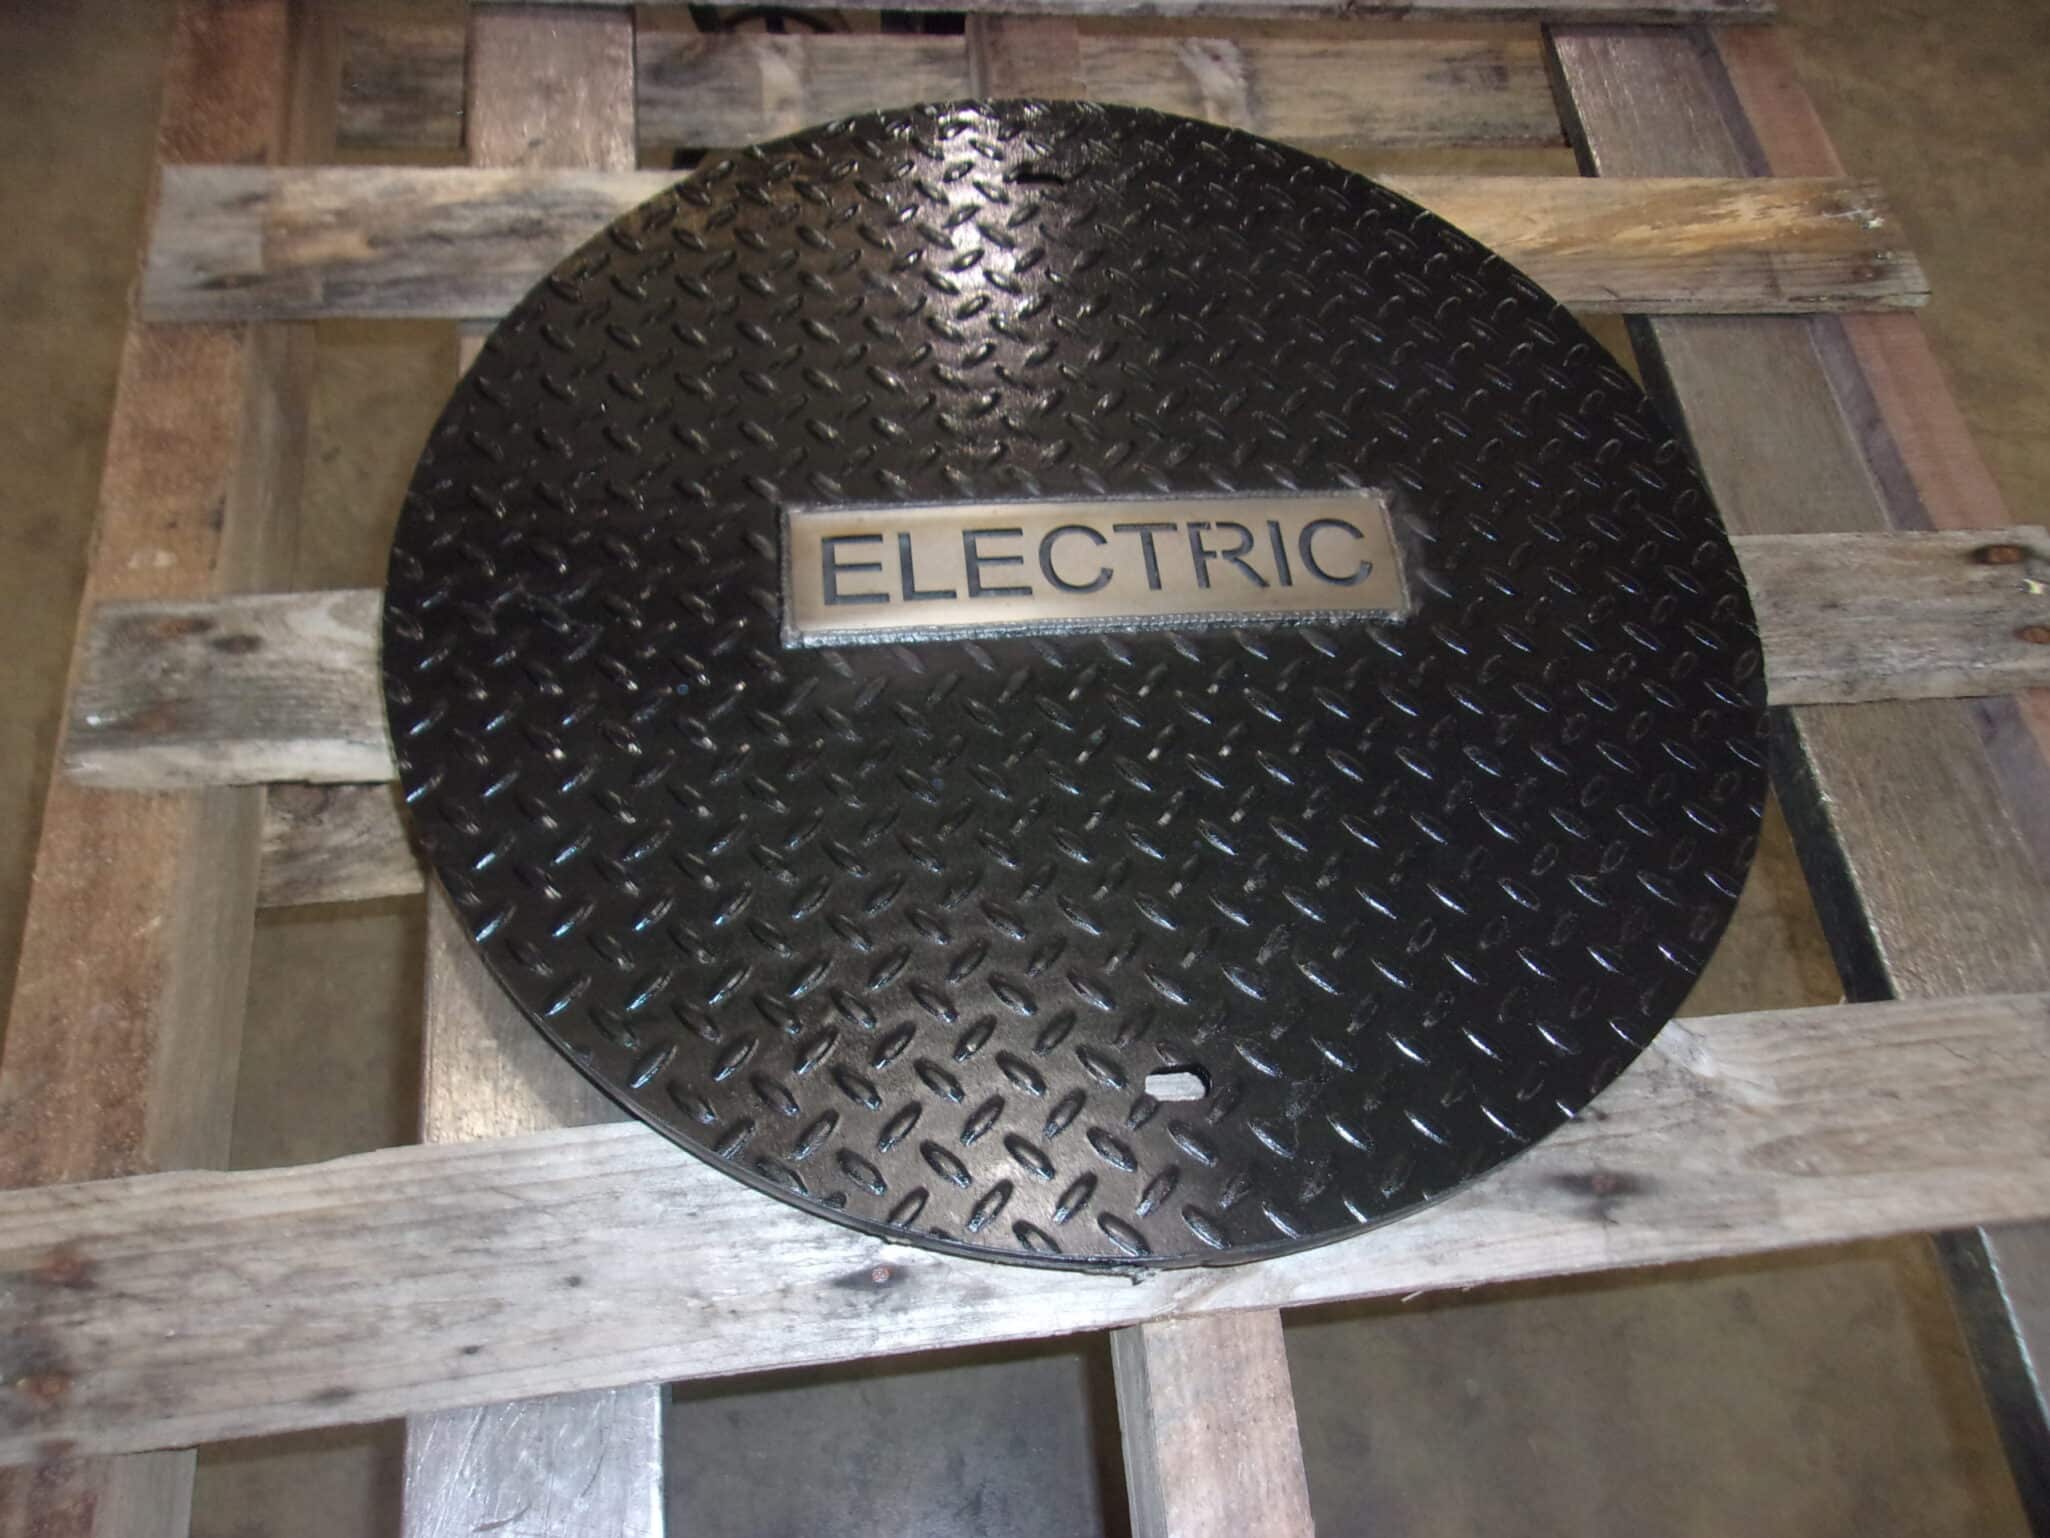 ELECTRIC REPLACEMENT MANHOLE COVER